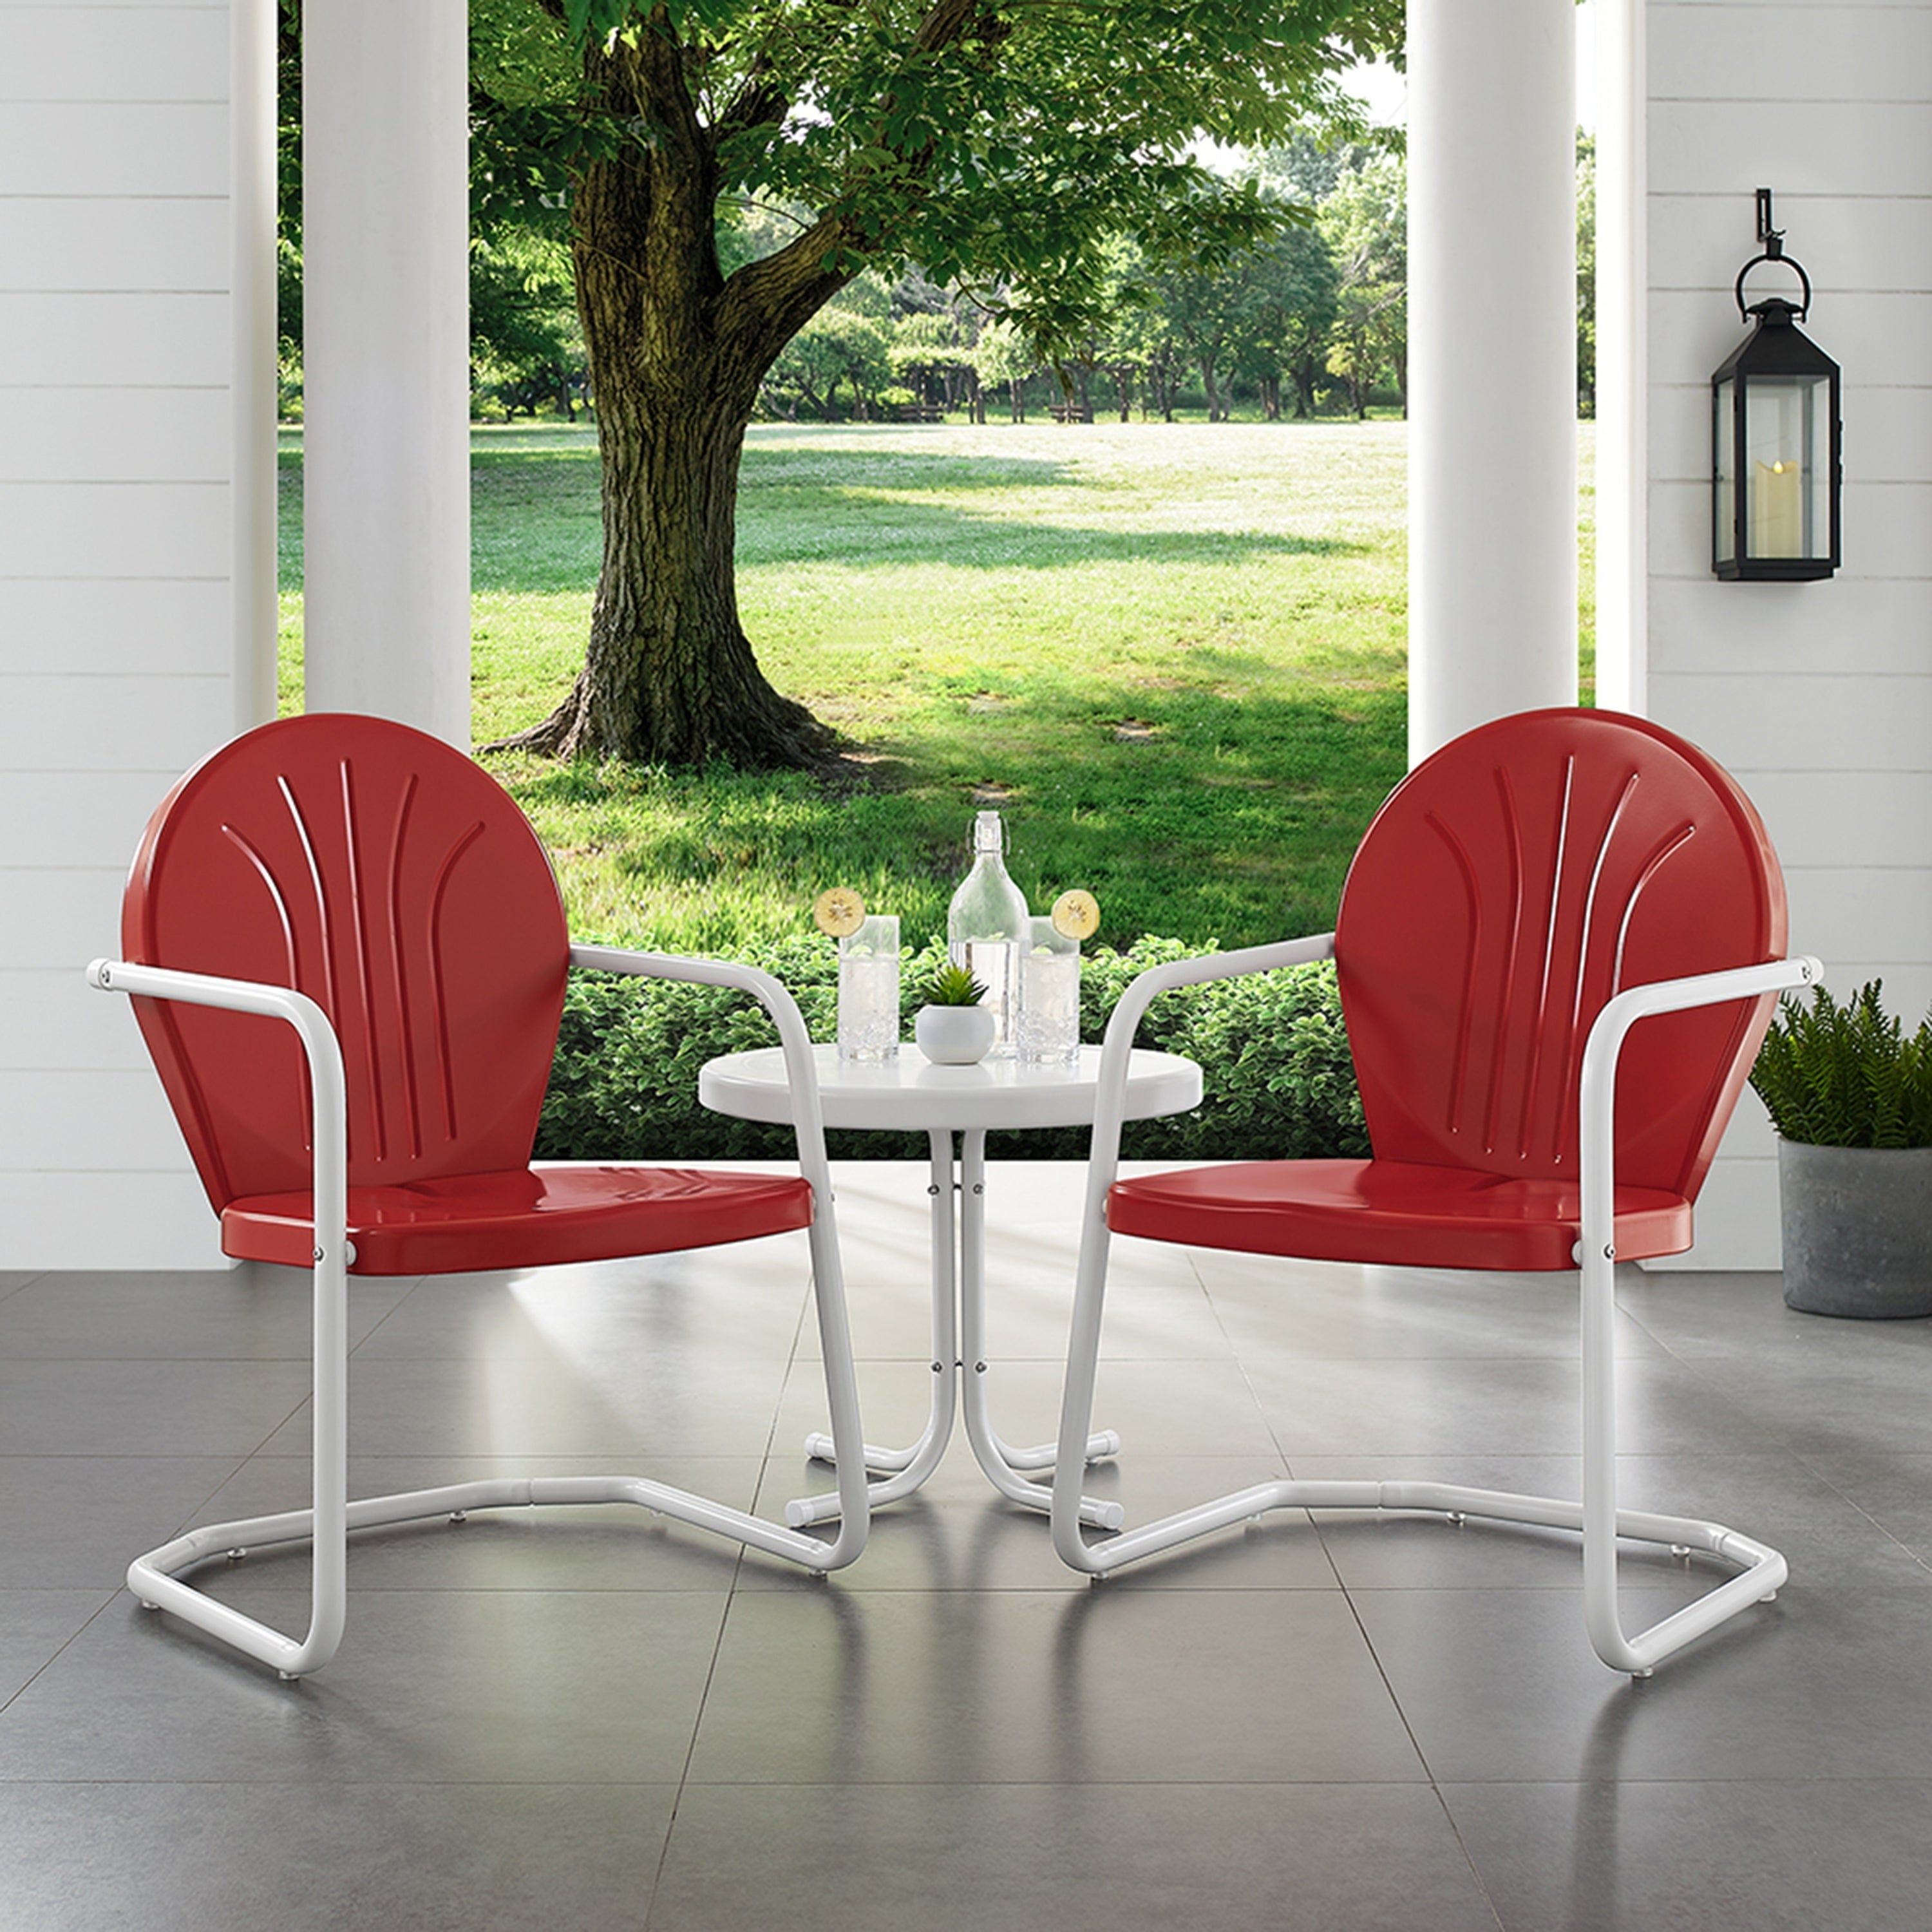 Crosley Furniture Patio Furniture | Find Great Outdoor Seating Intended For Most Current Bate Red Retro 3 Piece Dining Sets (View 4 of 20)